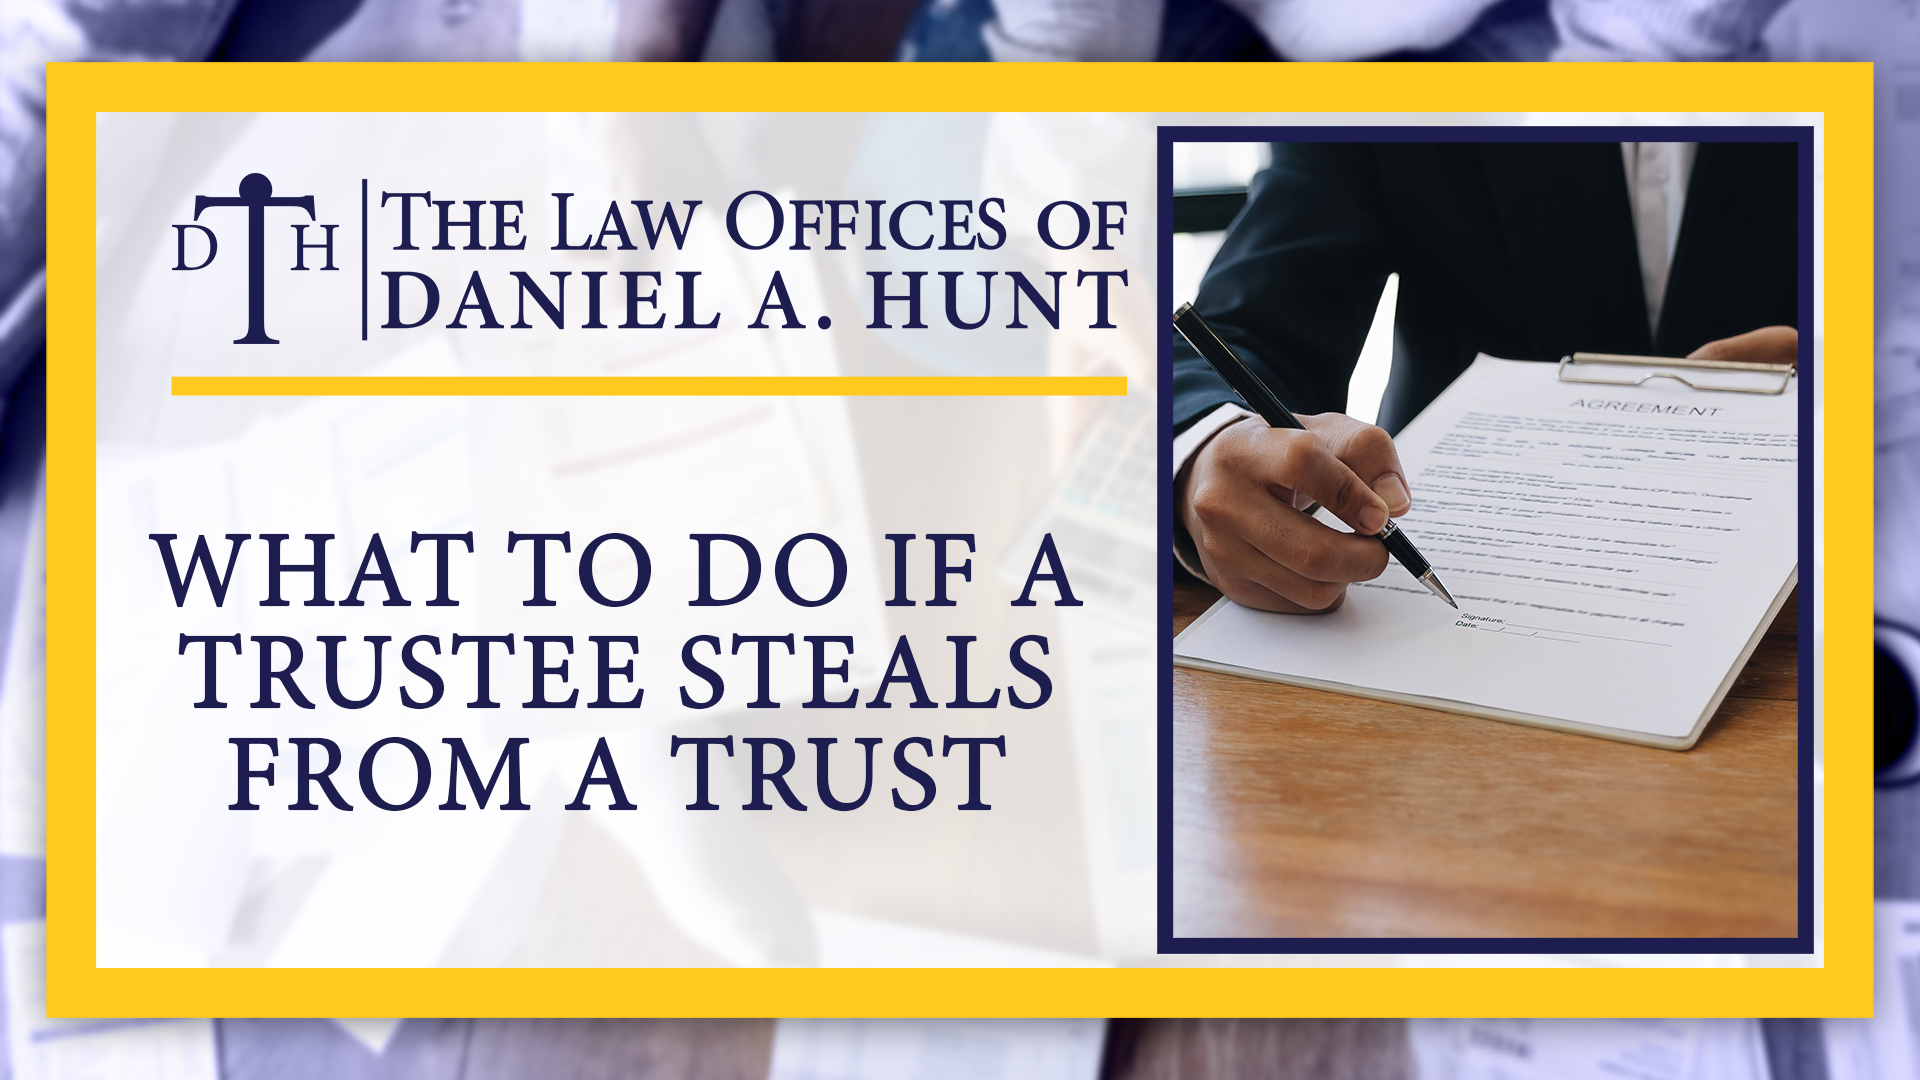 What To Do If a Trustee Steals From a Trust